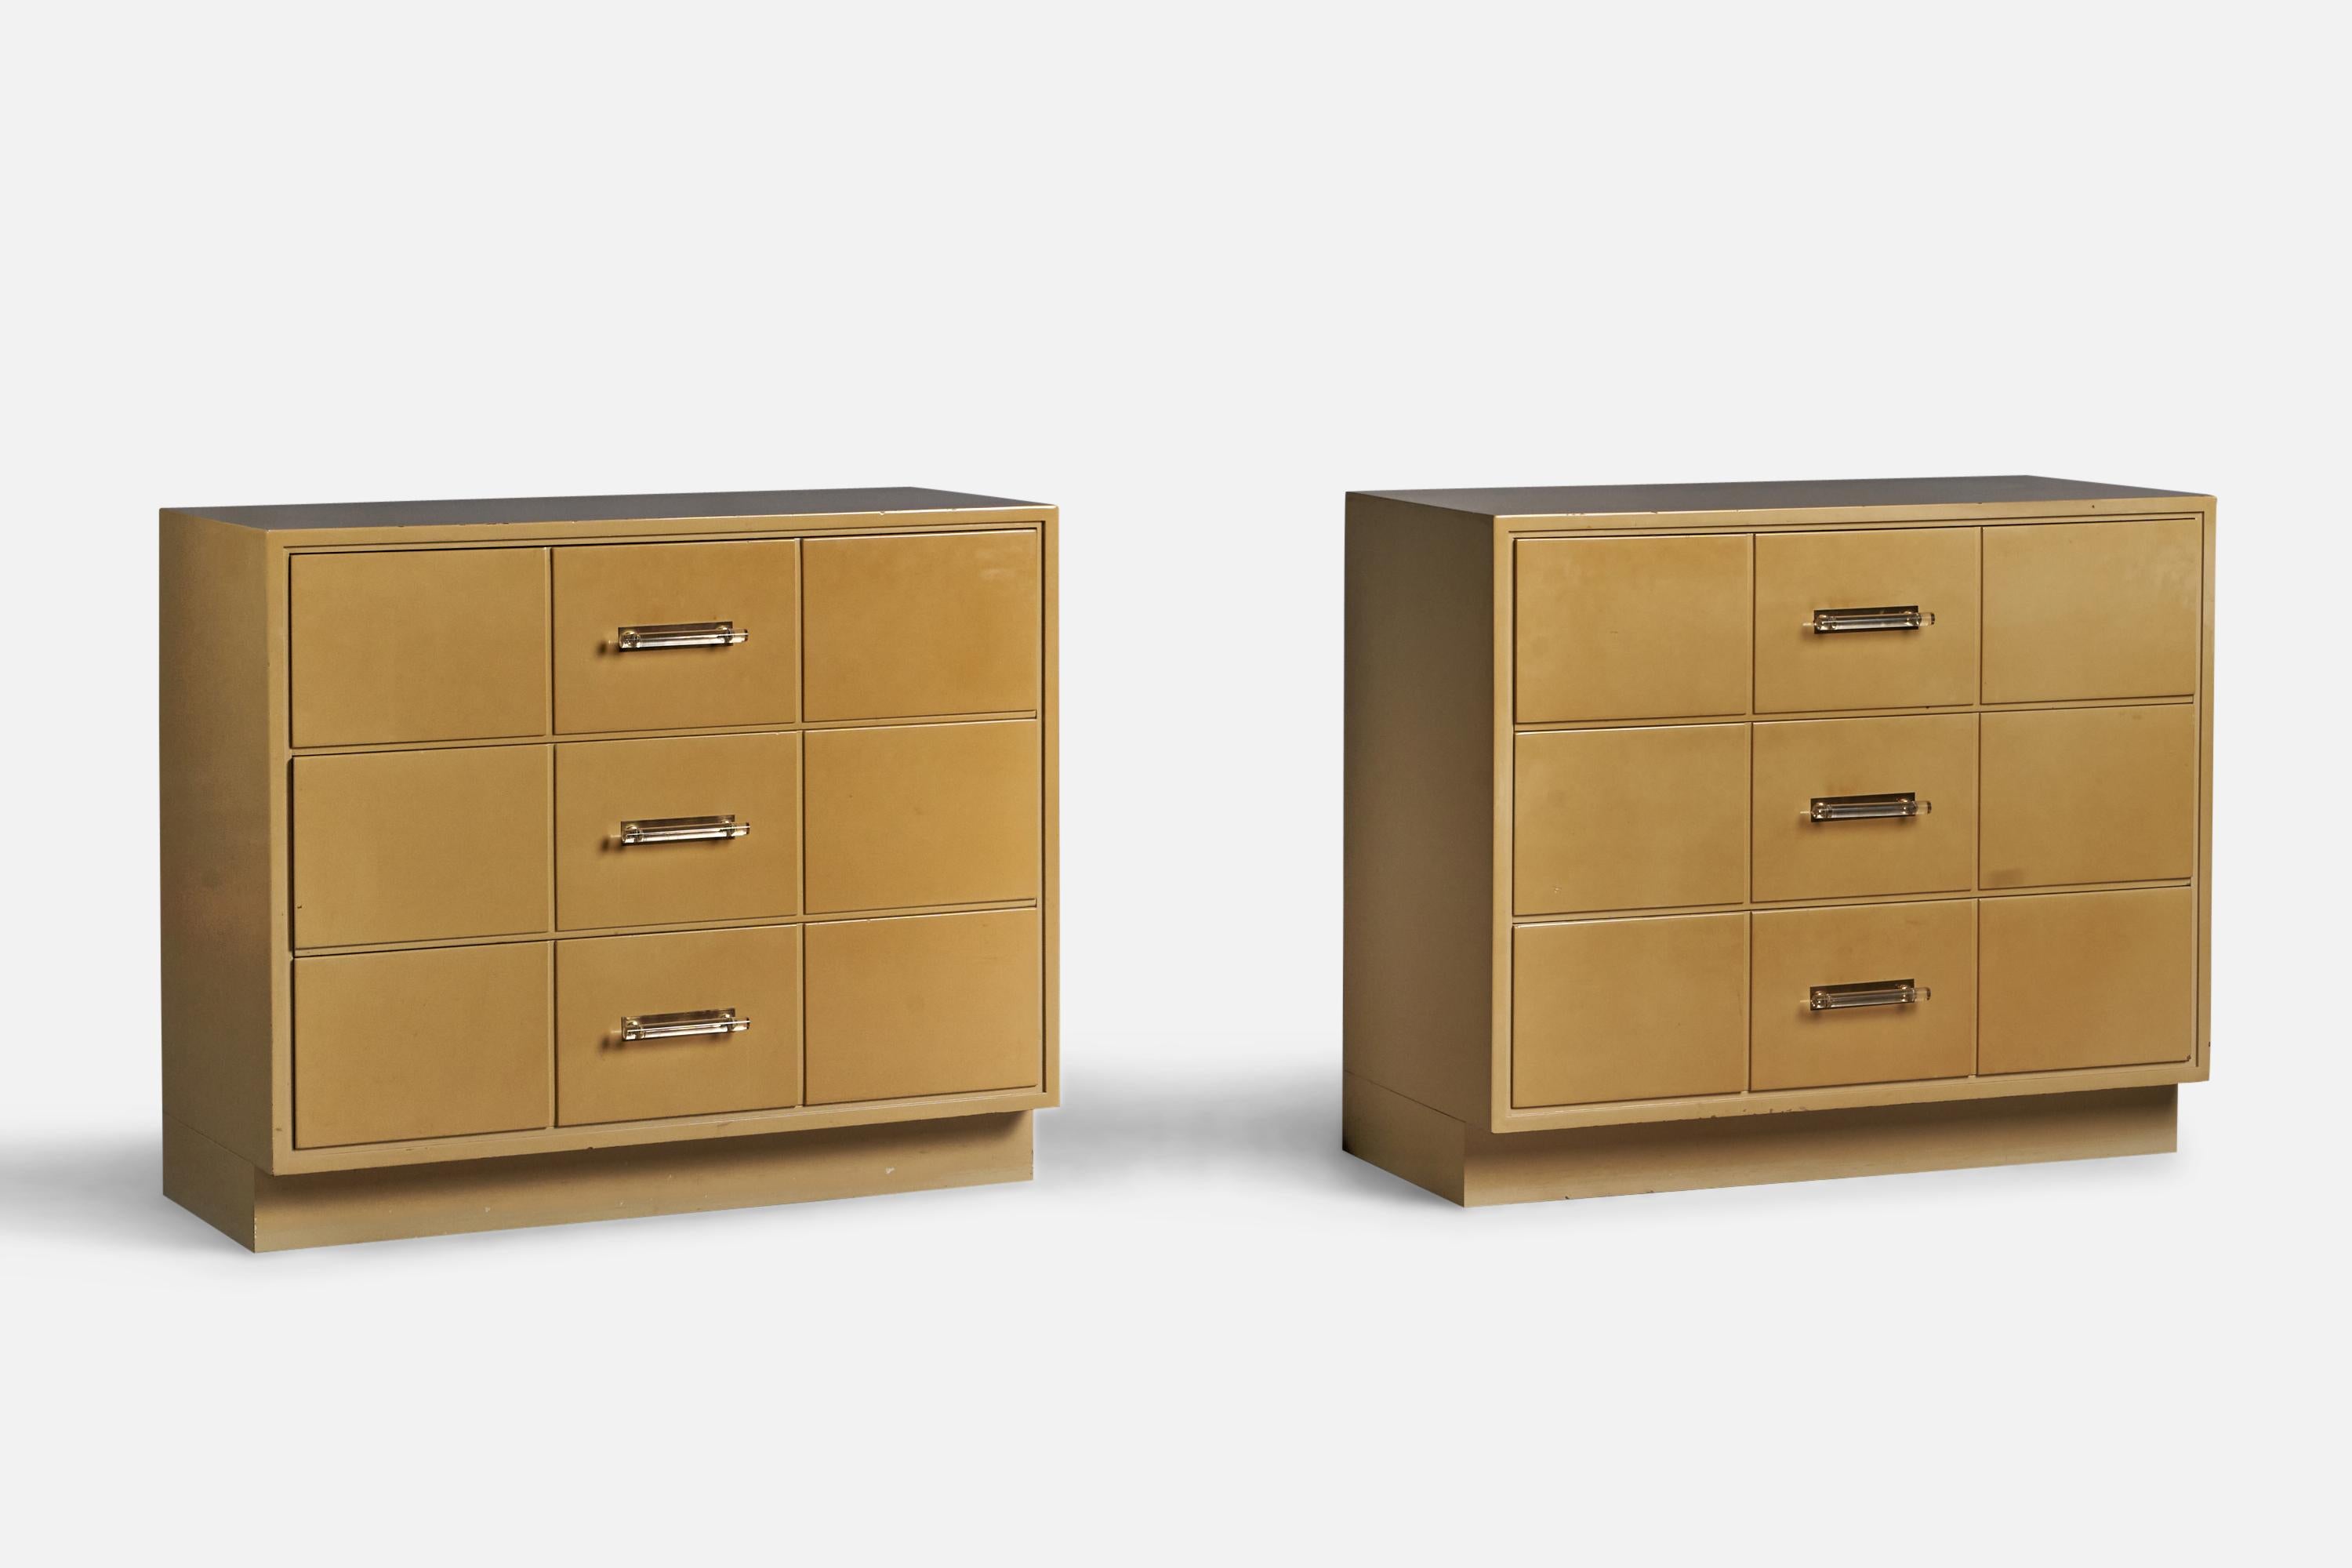 A pair of beige-lacquered wood, brass and lucite chest of drawers, designed by Tommi Parzinger and produced by Charak Modern, USA, 1950s.